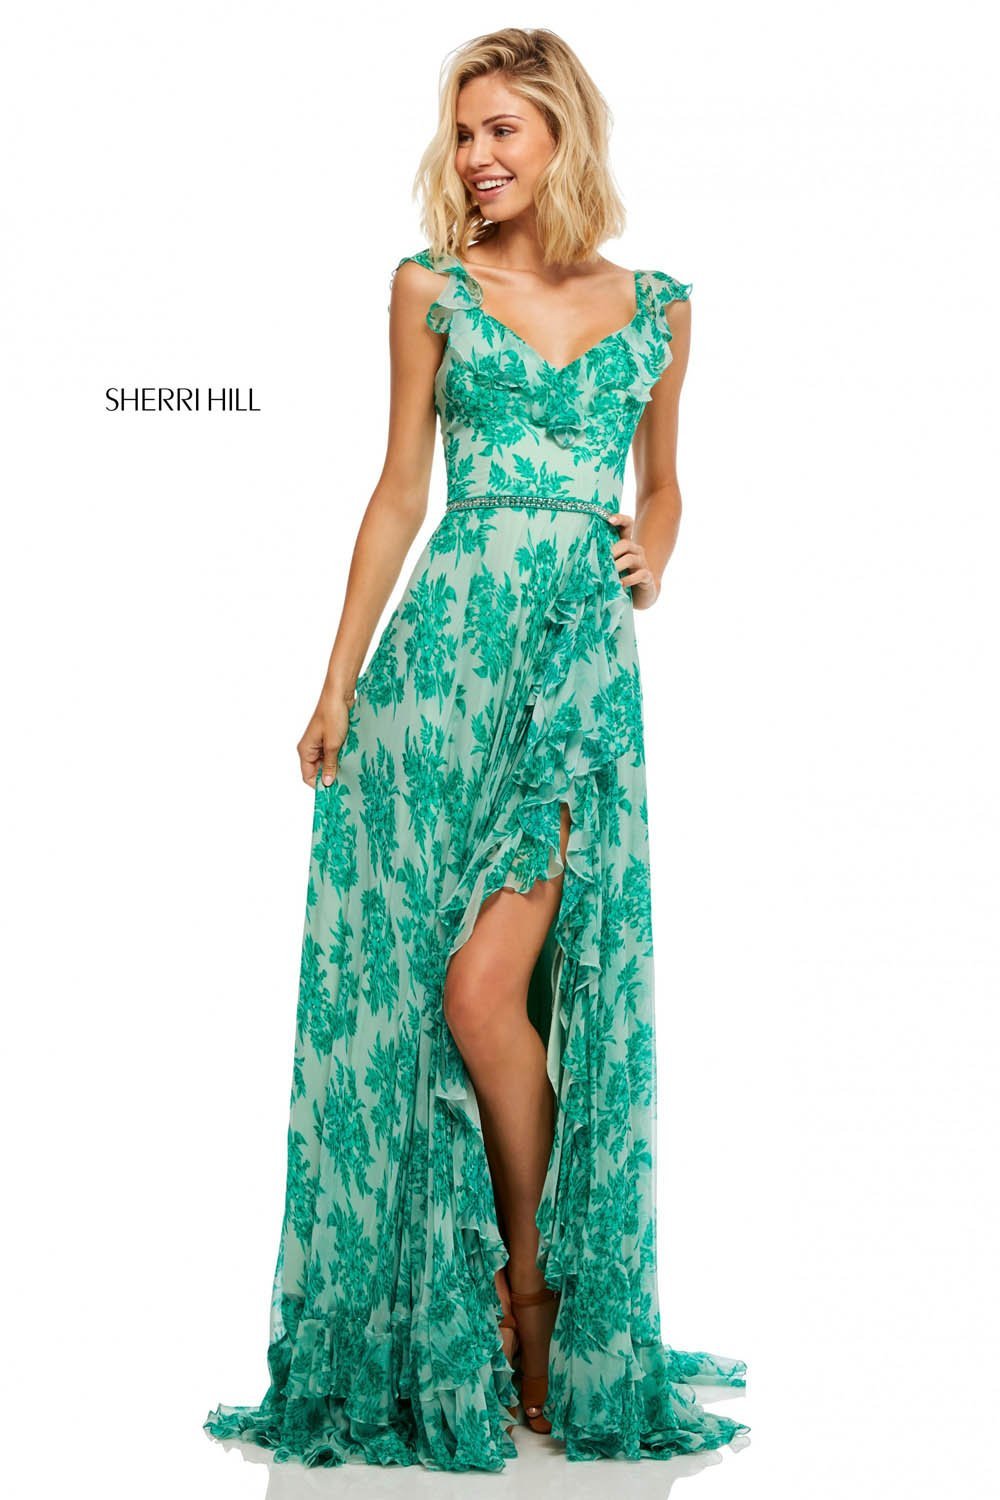 Sherri Hill 52713 dress images in these colors: Green Print.